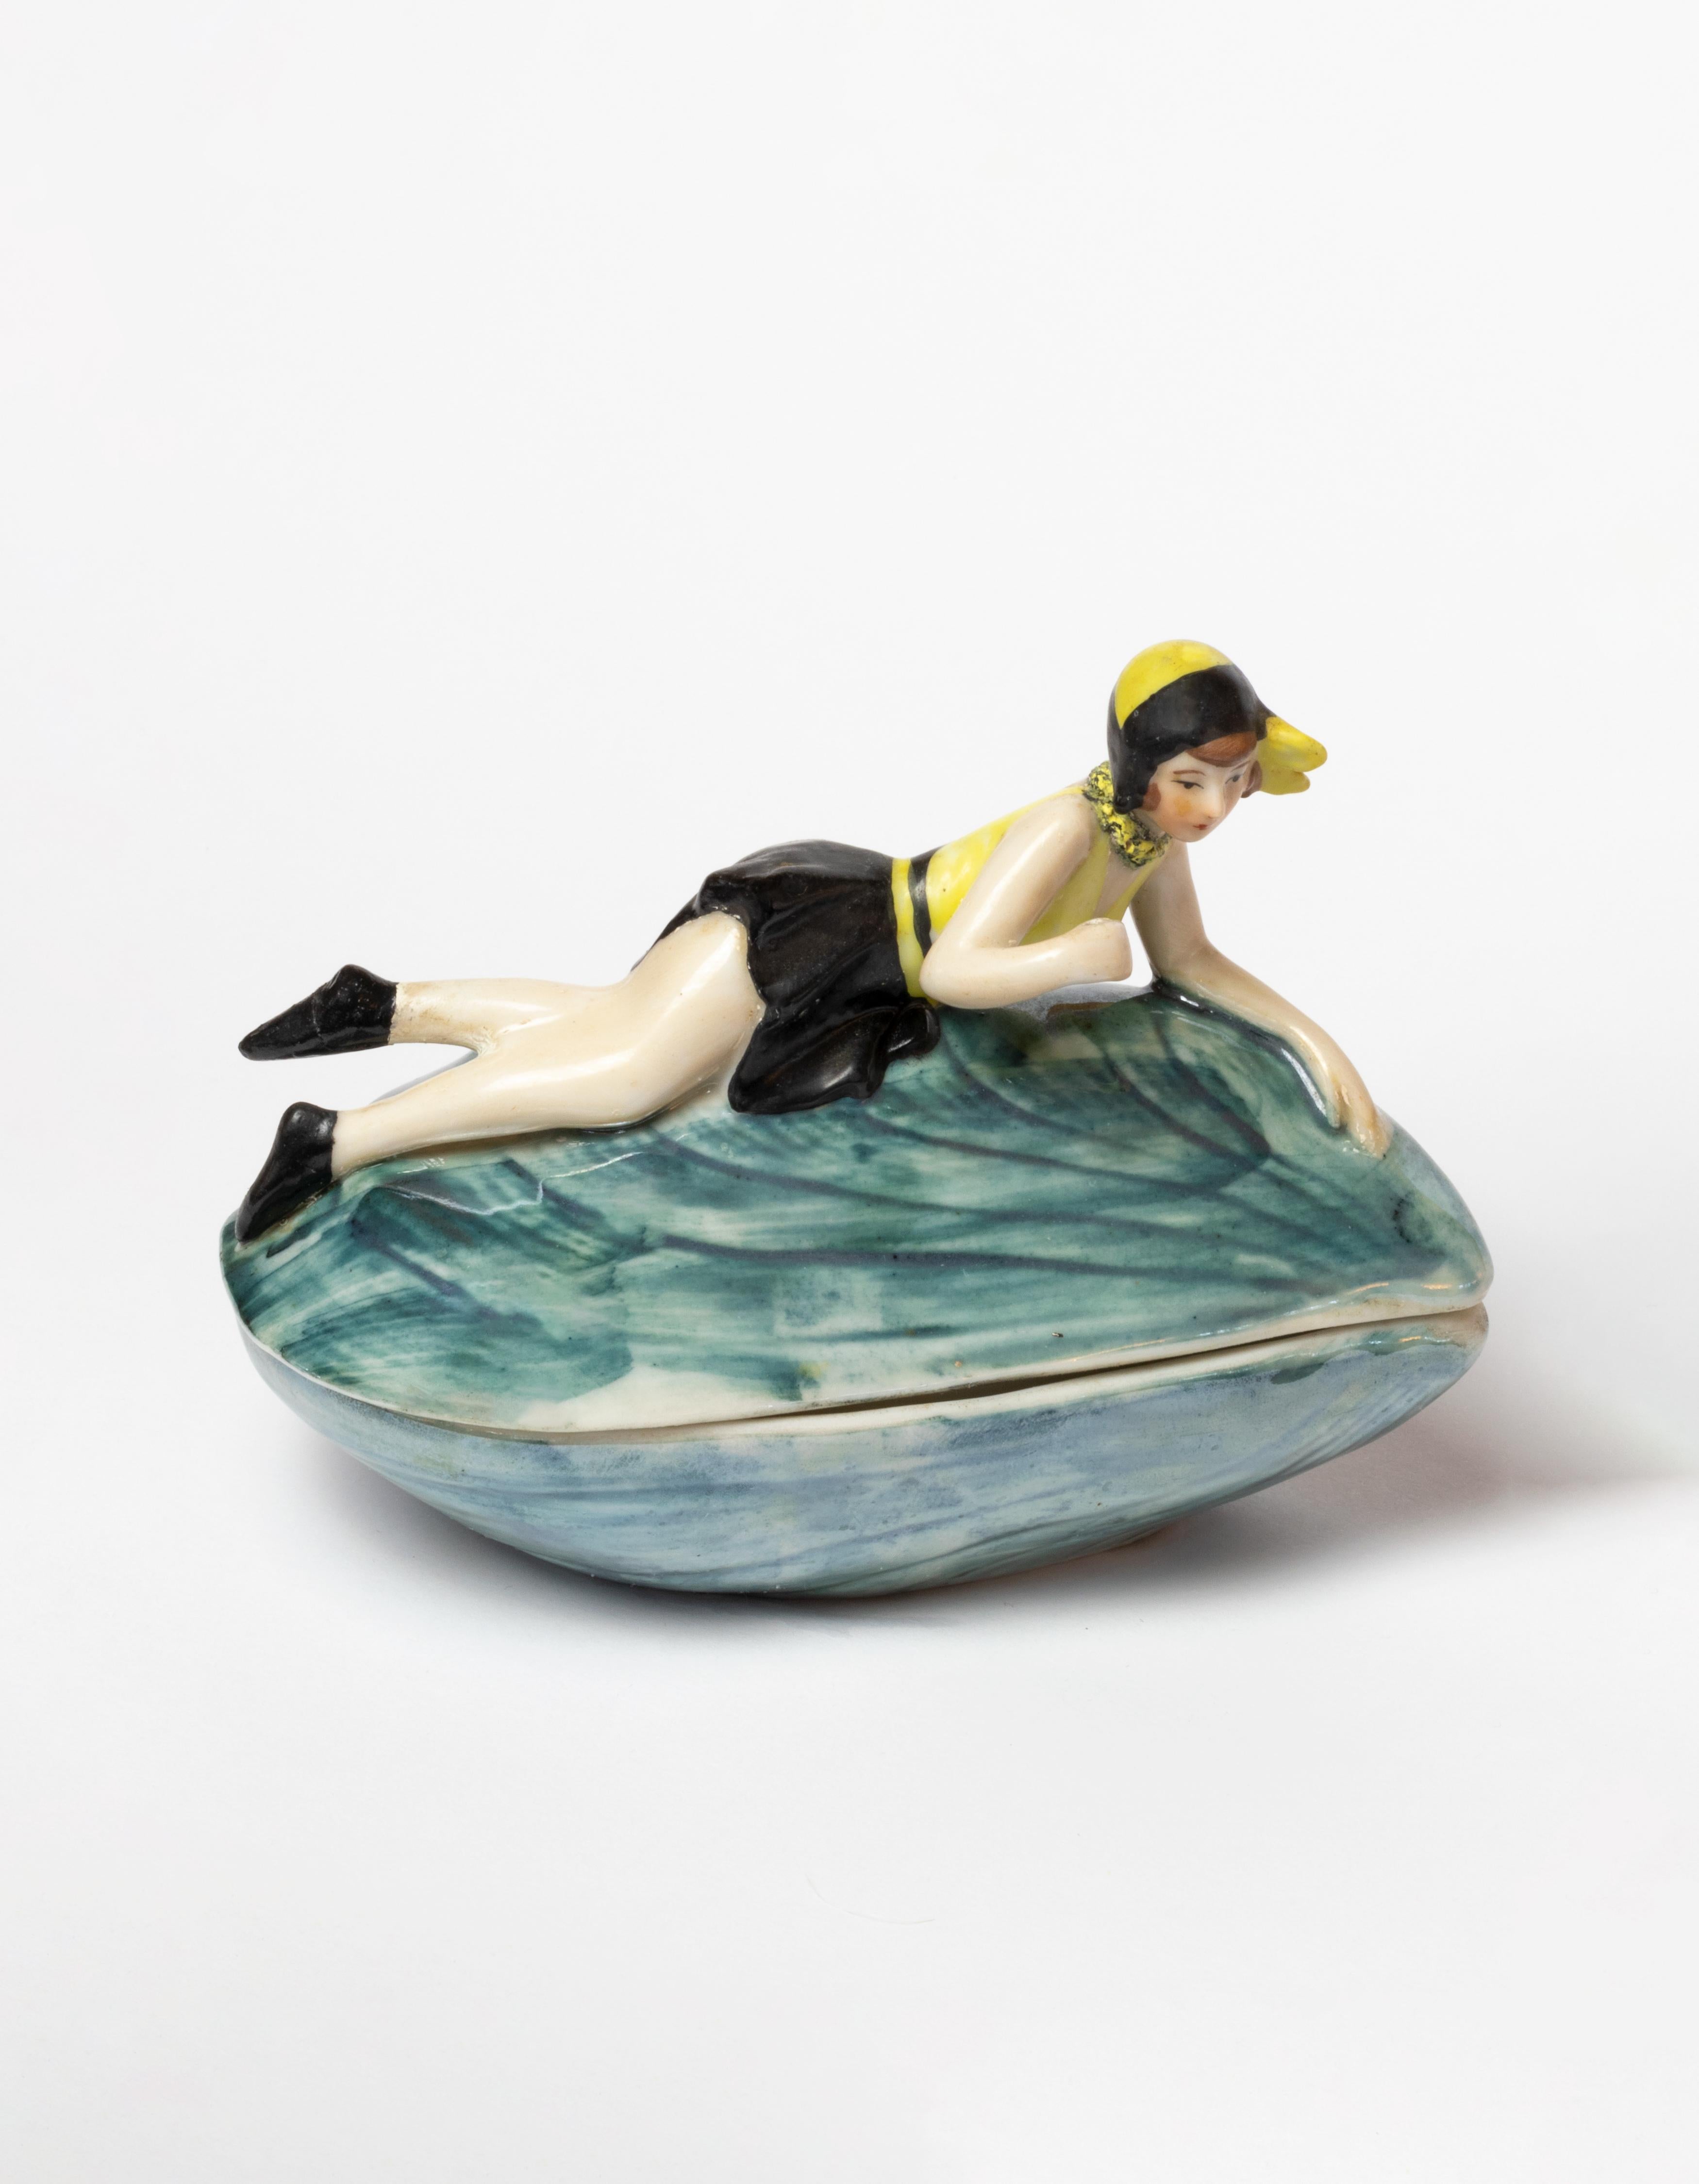 Art Deco Mussel Shell Rice Powder Box Pin Up Woman Porcelain by Goebel, 1929